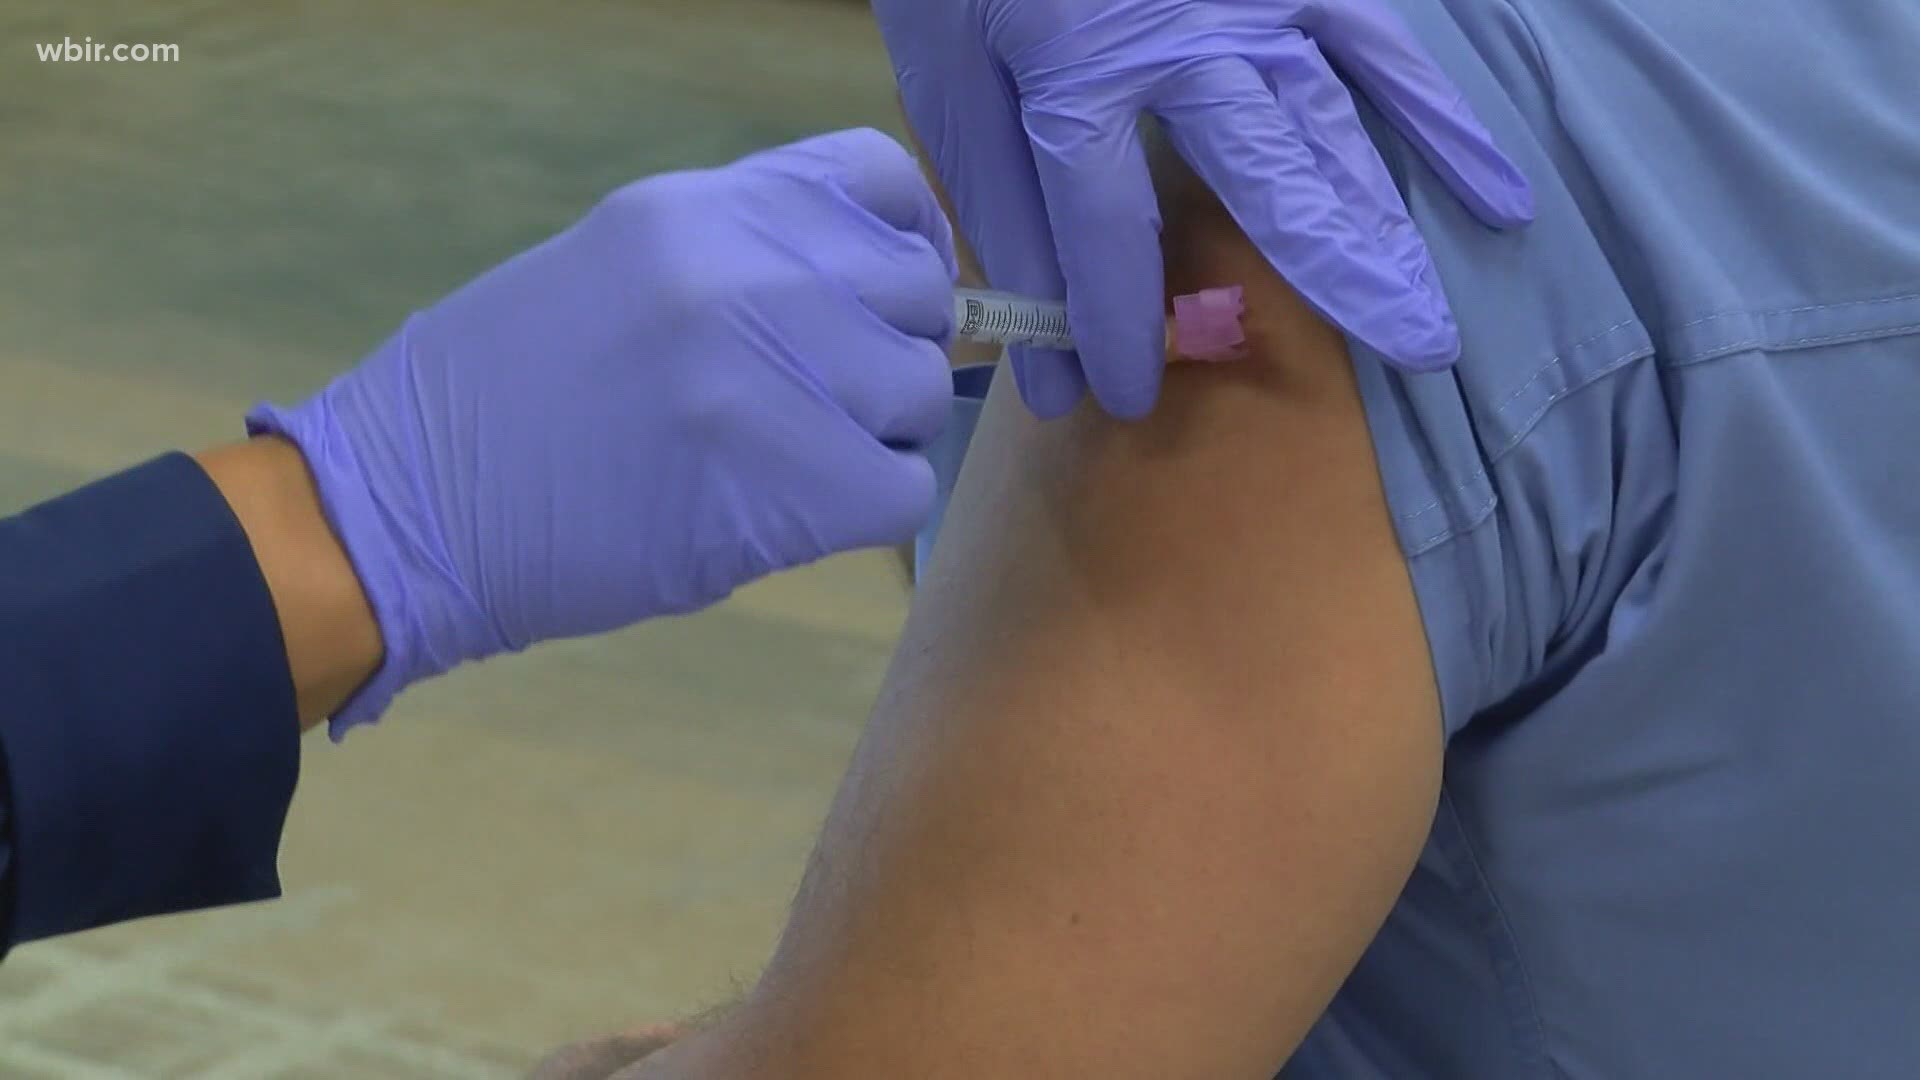 House speaker Cameron Sexton said only about 40% of people are even willing to get the COVID-19 vaccine.